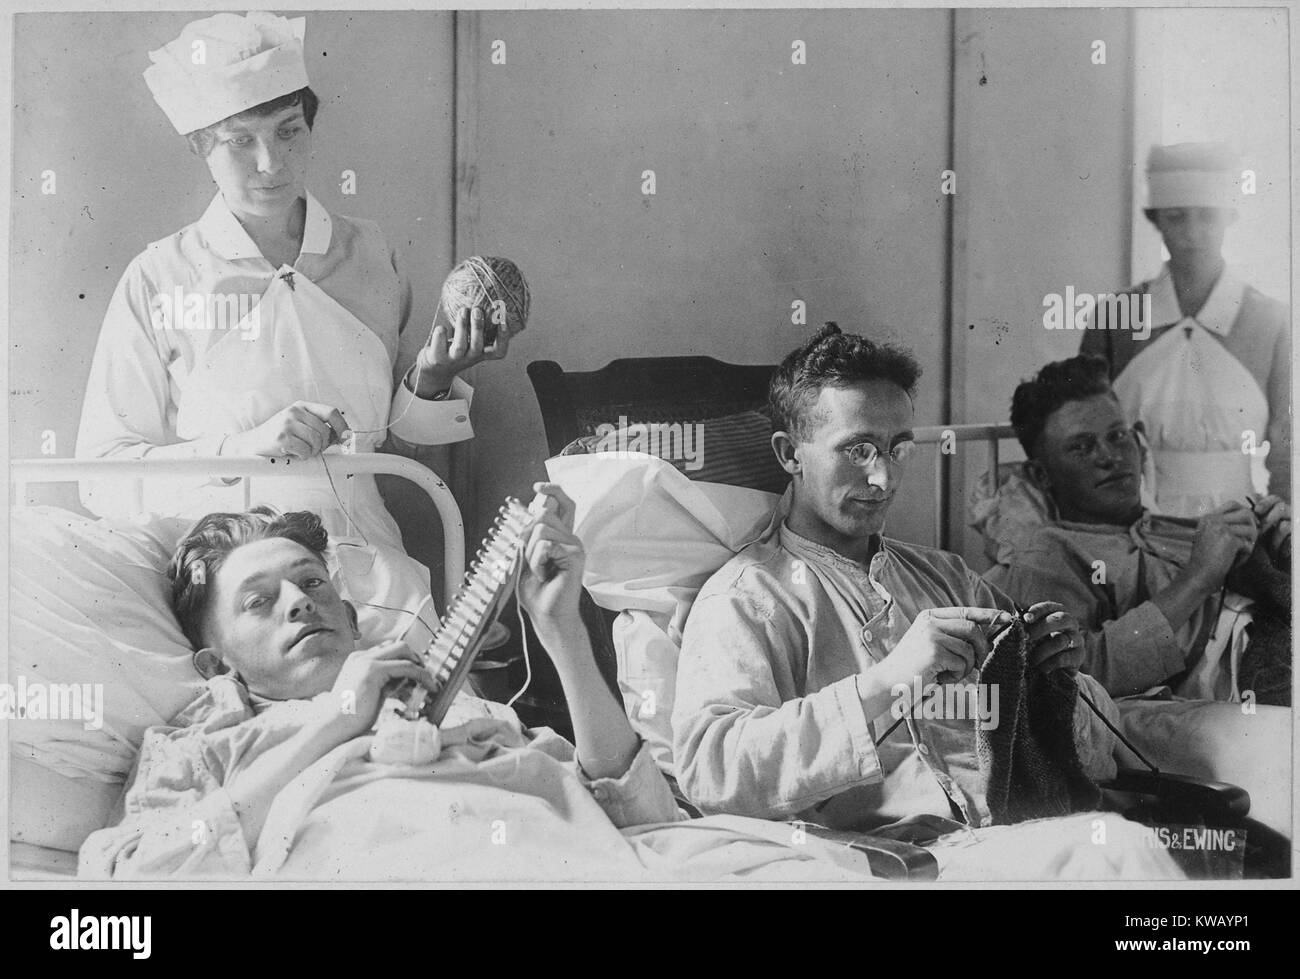 Three wounded soldiers knit from a hospital bed at Walter Reed Hospital, Washington, District of Columbia, 1917. Image courtesy National Archives. Stock Photo